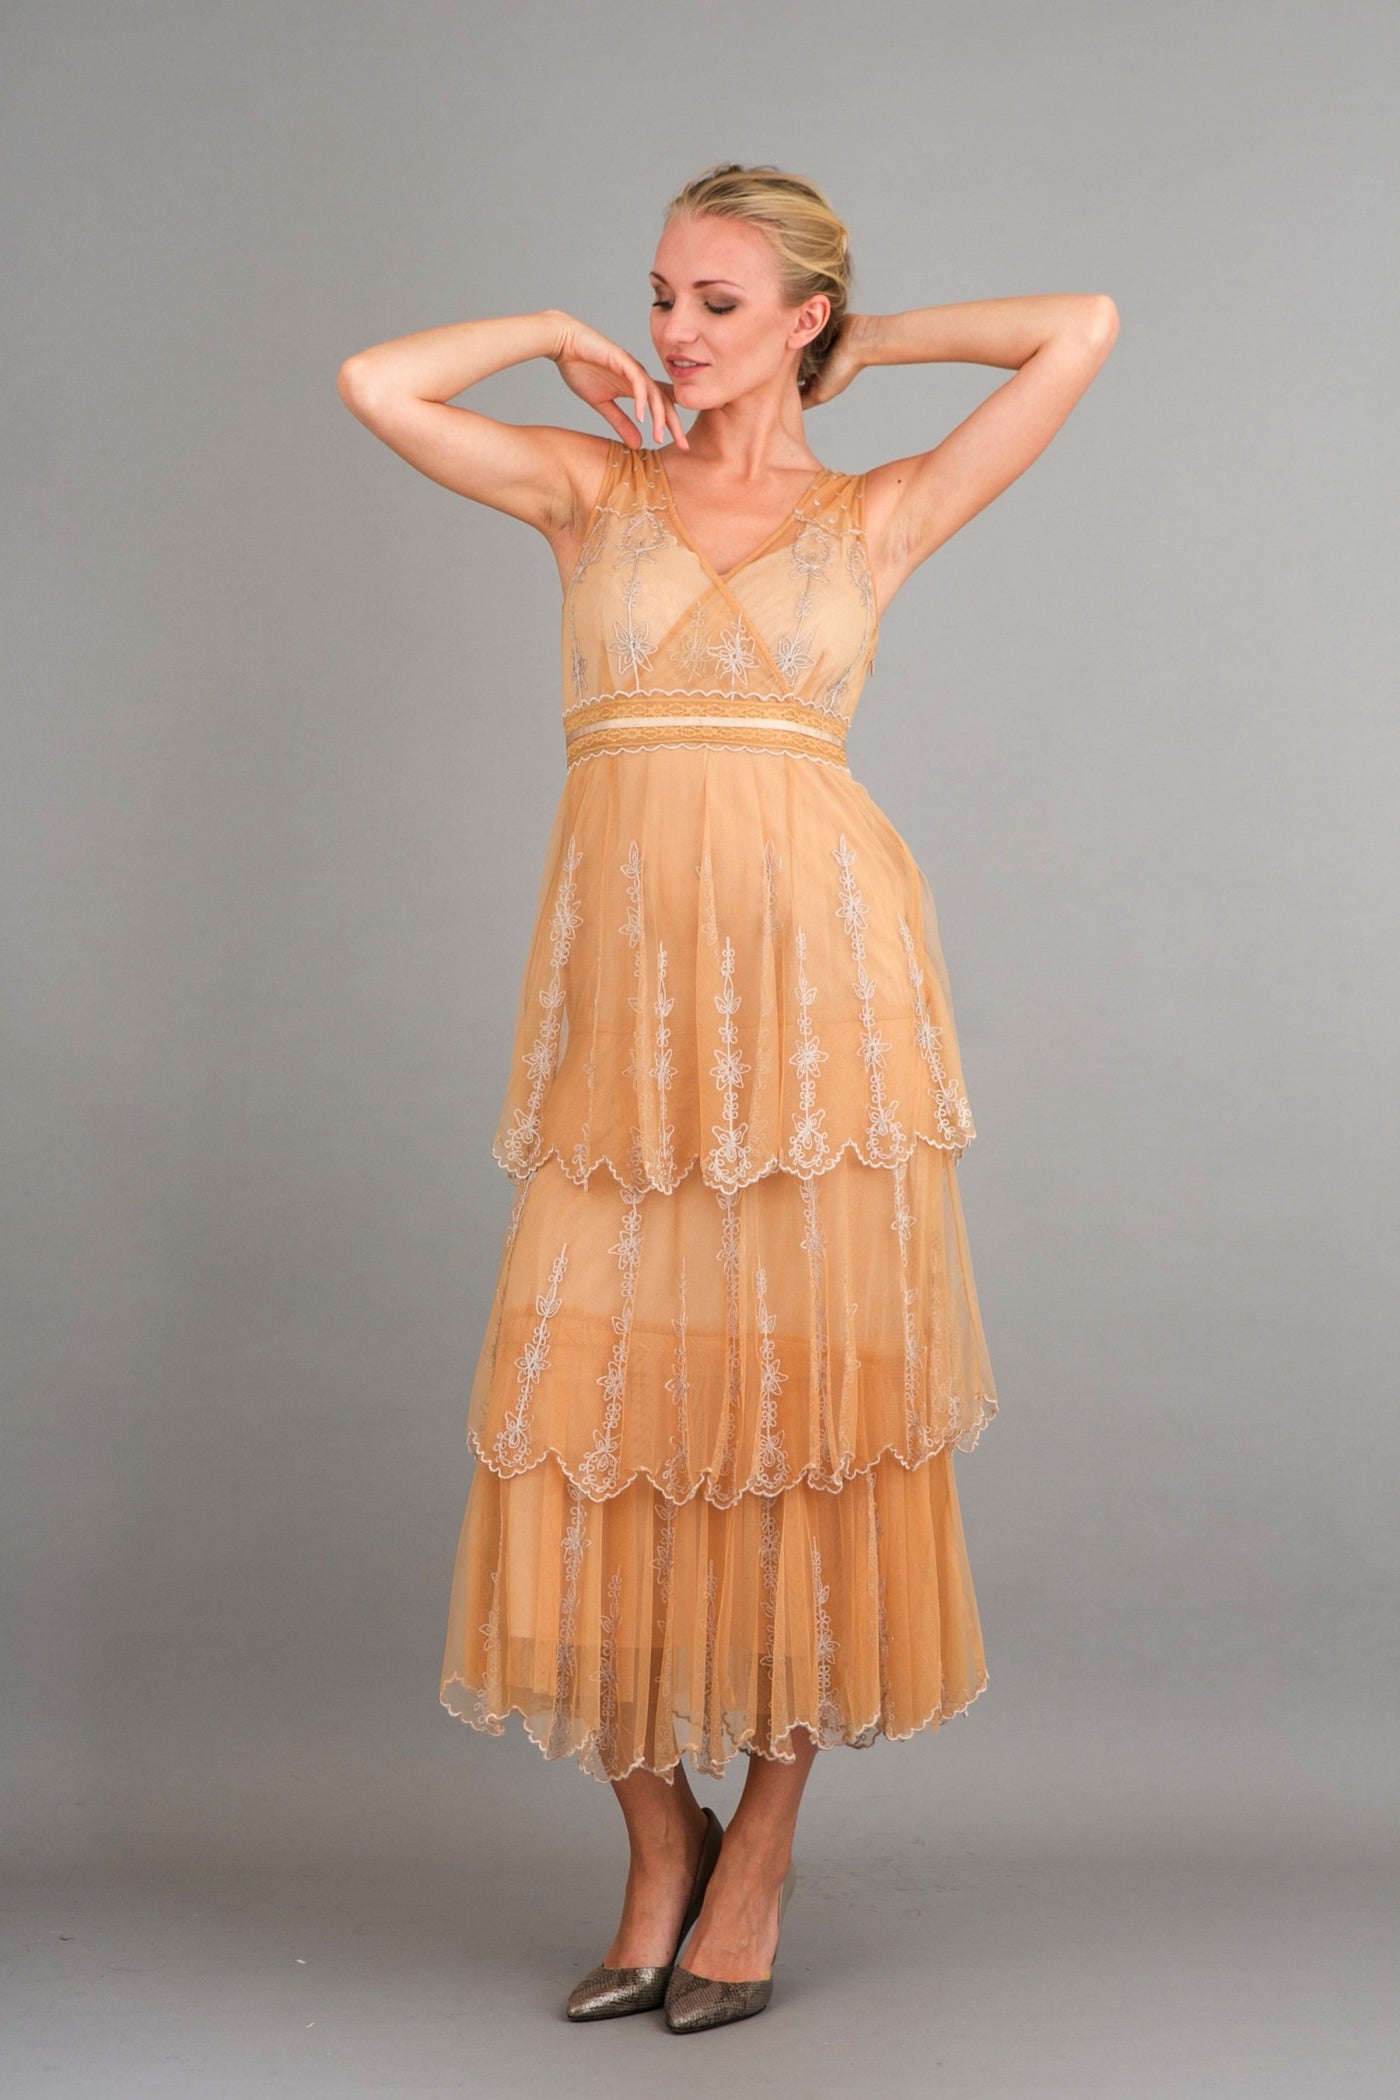 Vintage Inspired Empire Waist Party Dress in Gold by Nataya - SOLD OUT